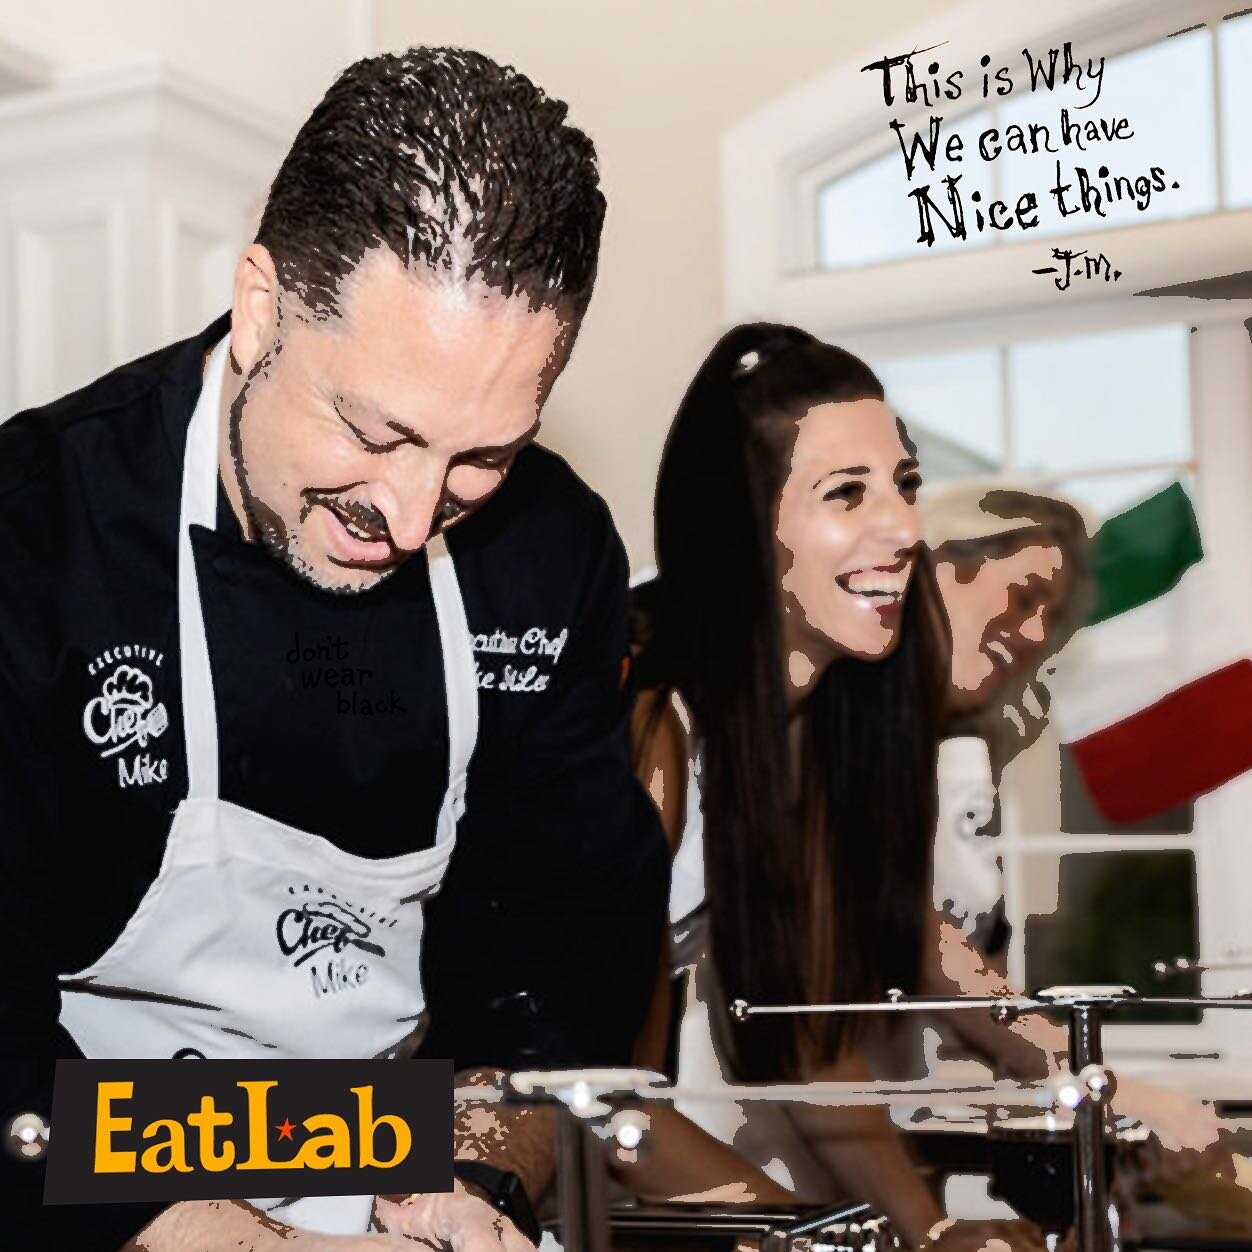 .
(This post speaks to some of the travels and journey of Chef Mike DiLeo. He is the first chef featured by EatLab as his sampling was completely impressive. We are NOT just fans of his cuisine, we are customers ourselves.) 

EXECUTIVE CHEF MIKE DILE